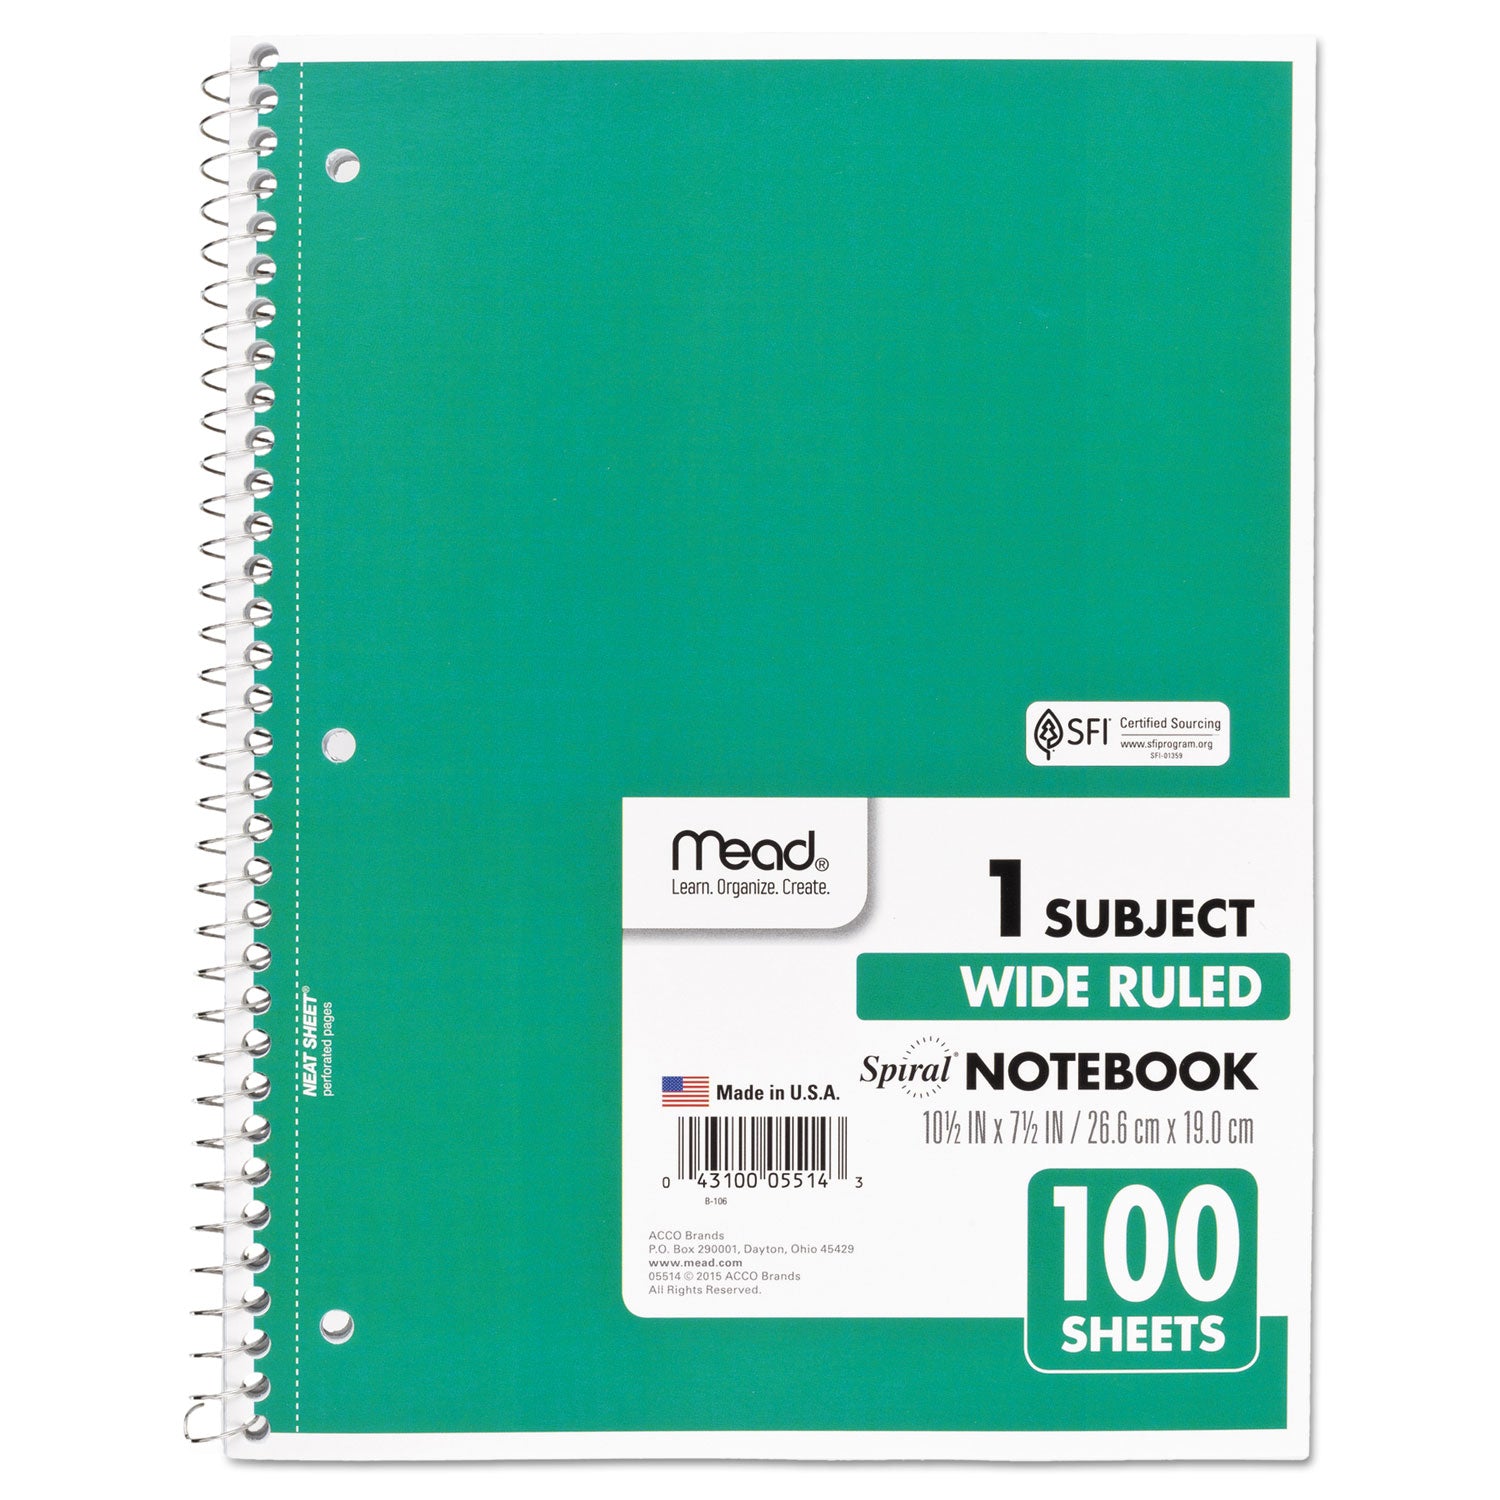 Spiral Notebook, 3-Hole Punched, 1-Subject, Wide/Legal Rule, Randomly Assorted Cover Color, (100) 10.5 x 7.5 Sheets - 